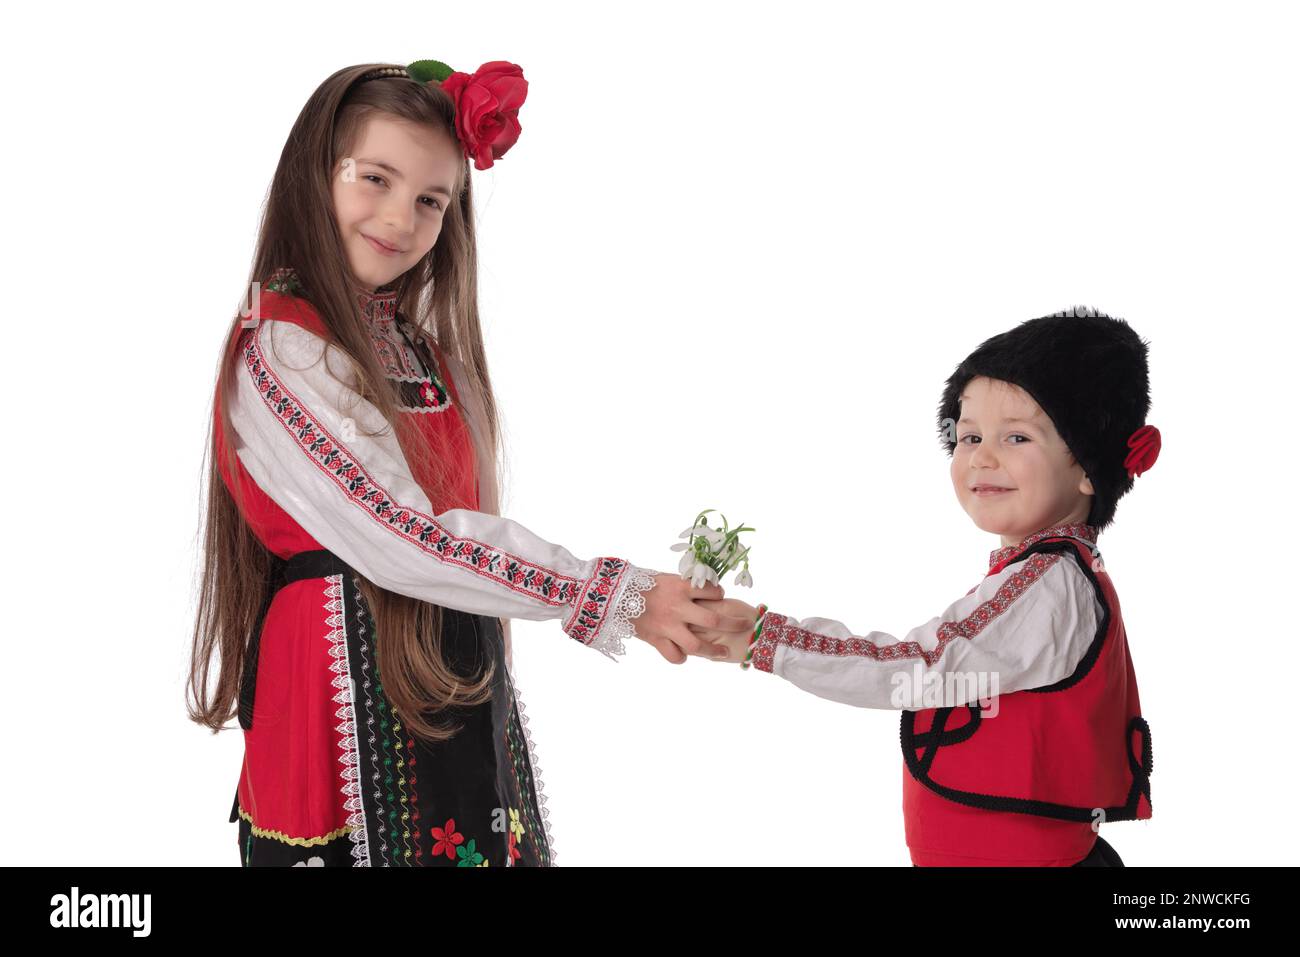 Bulgarian kids boy, girl in folklore ethnic costumes, bouquet spring flowers snowdros, wool martenitsa symbol of March Baba Marta holiday, Bulgaria Stock Photo